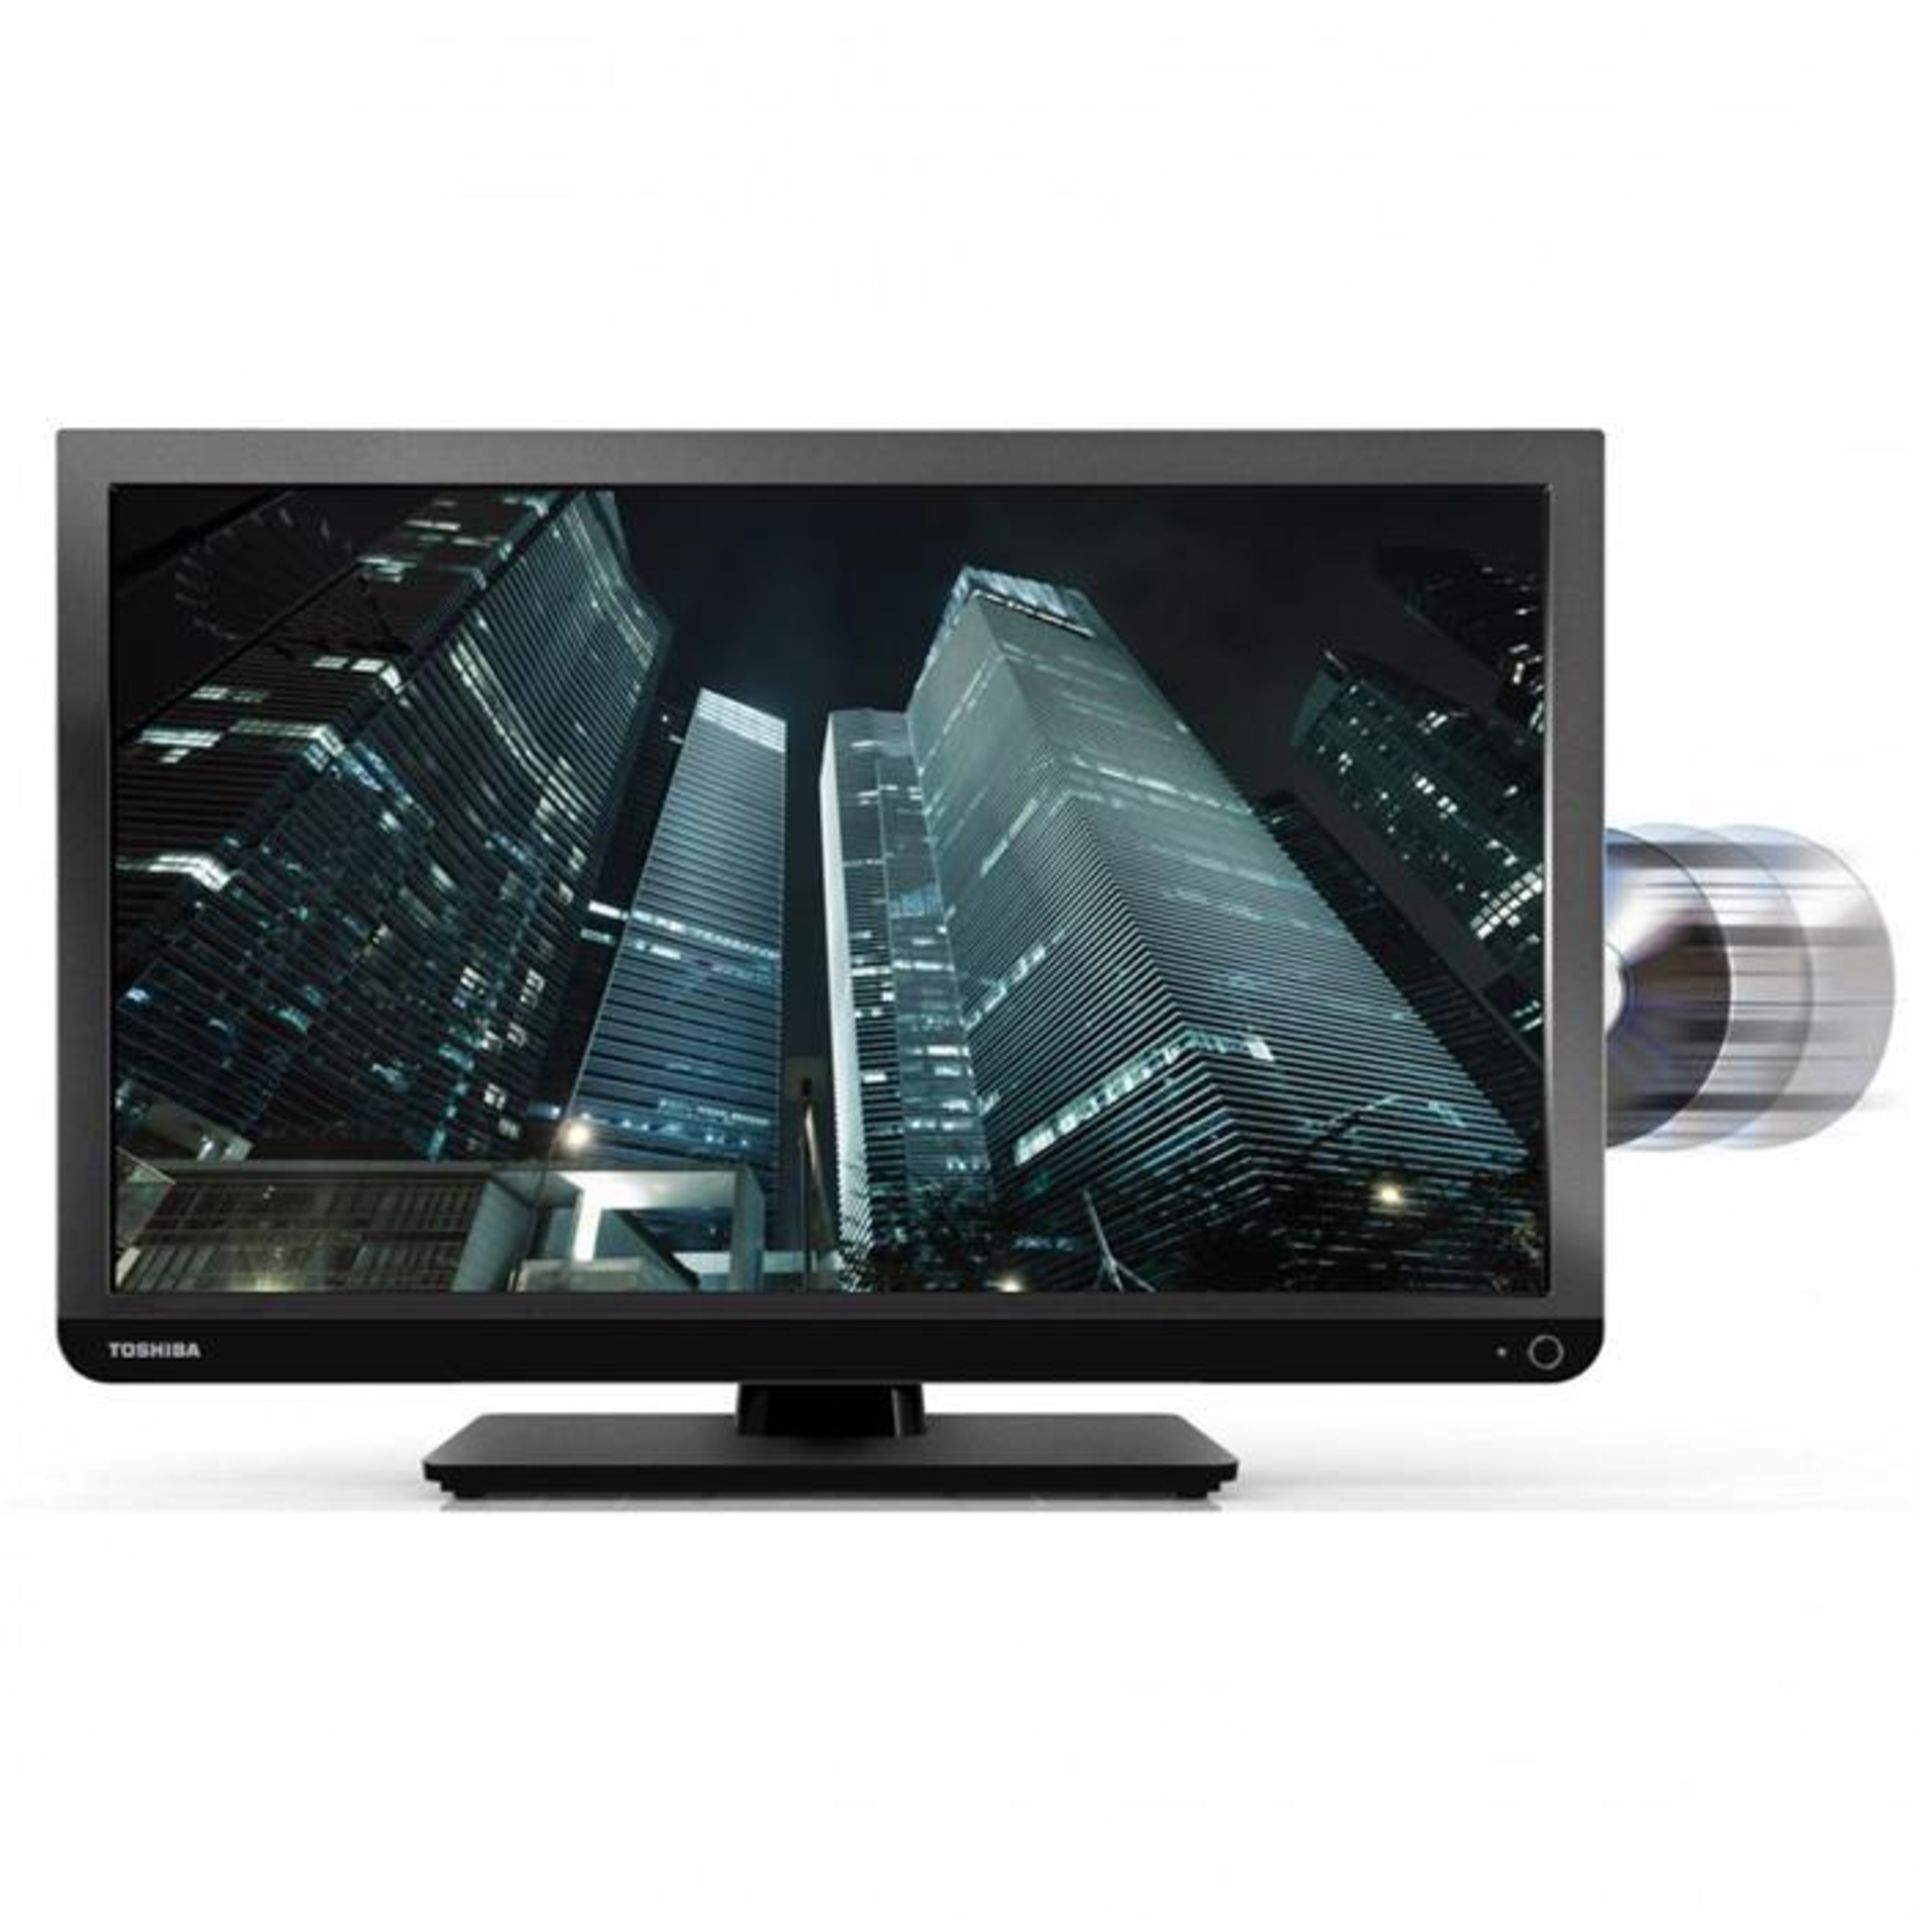 Toshiba 24D1433B/24D1433B2 24-inch High Definition LED TV with Built-In DVD Player [Energy Class A]